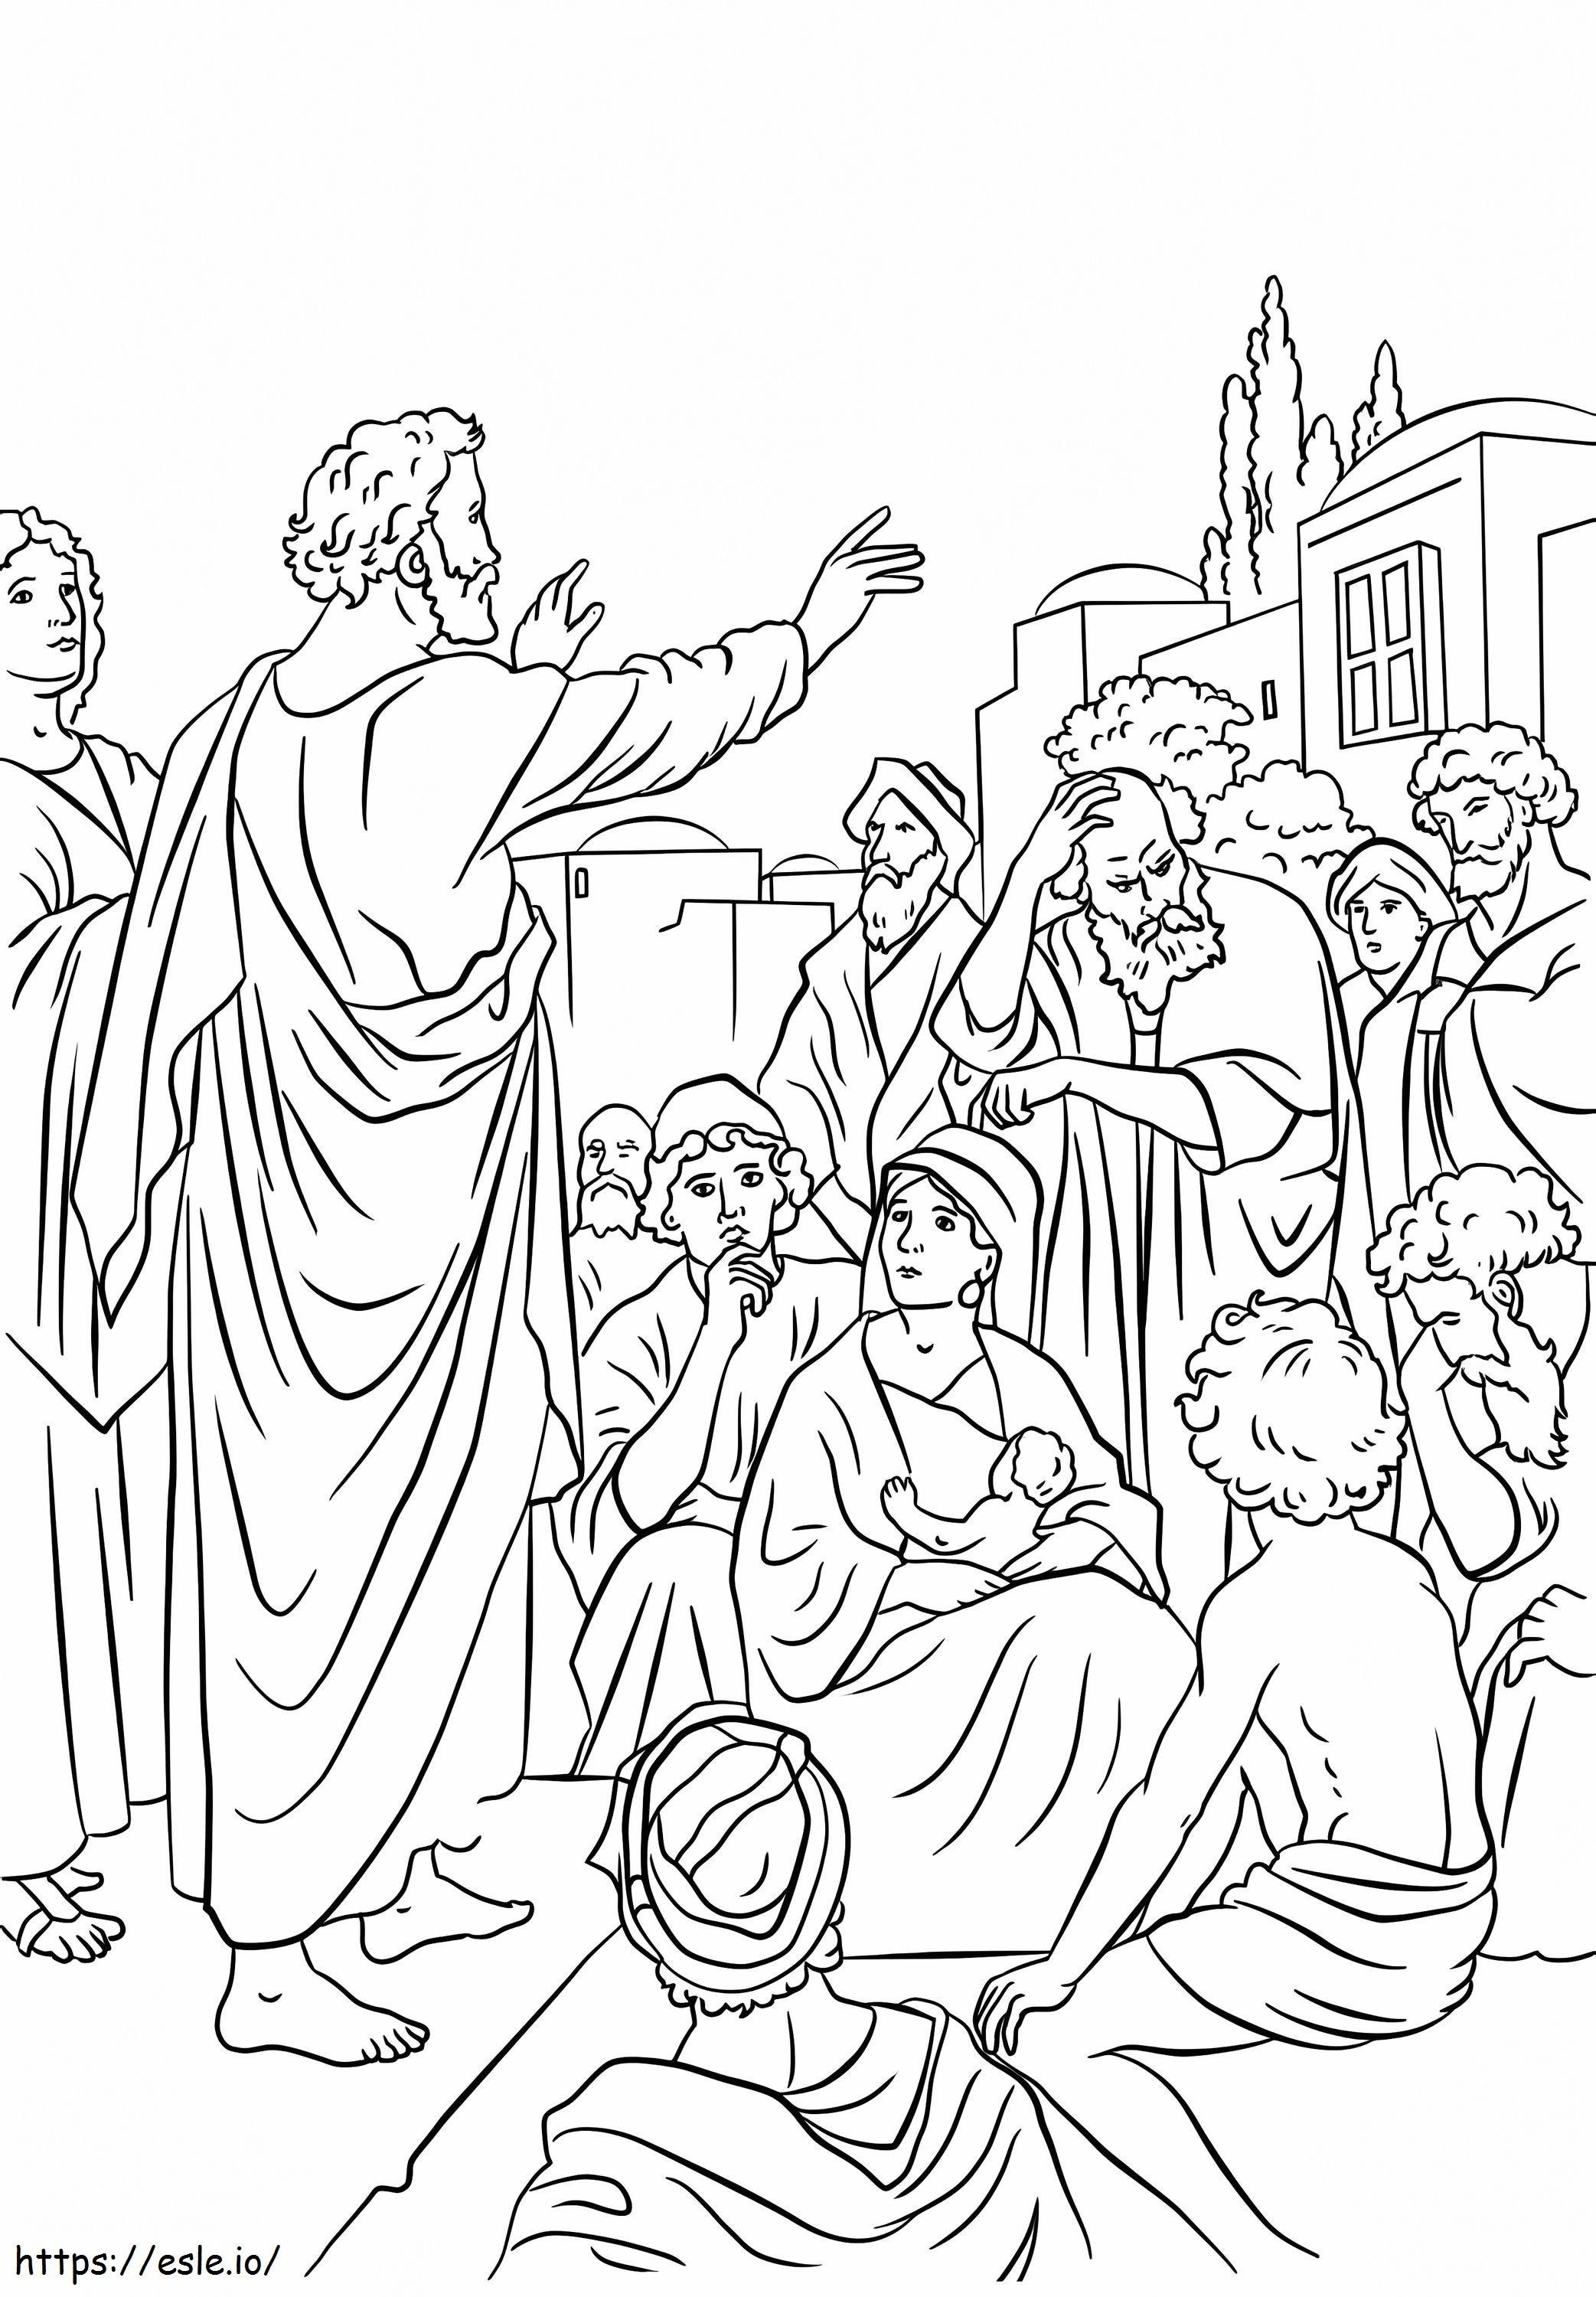 Peter Preaching At Pentecost coloring page